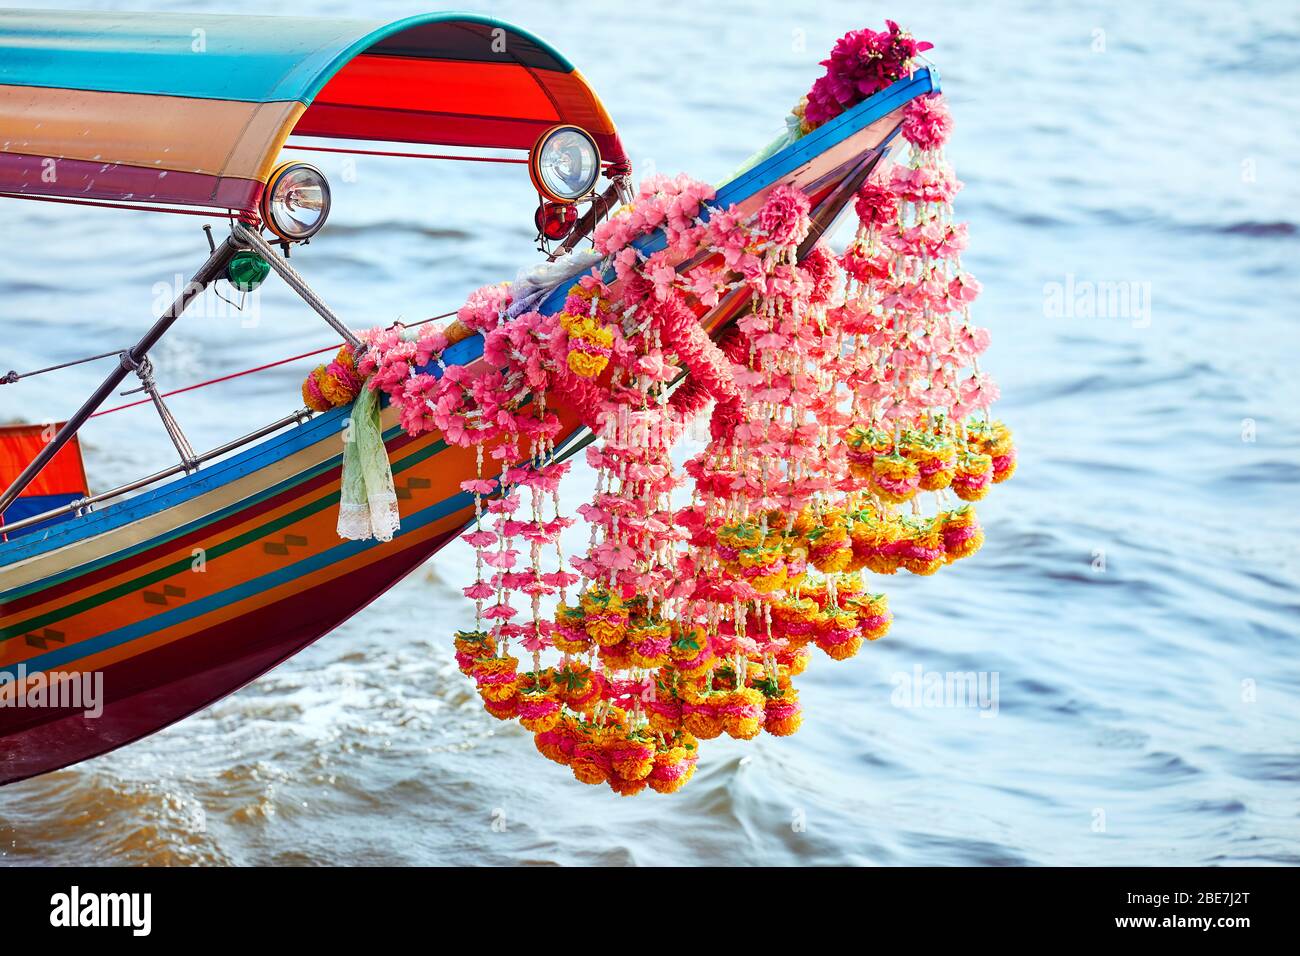 Traditional Thai longtail boat with flower garland close up in Chao Phraya river in Bangkok Stock Photo